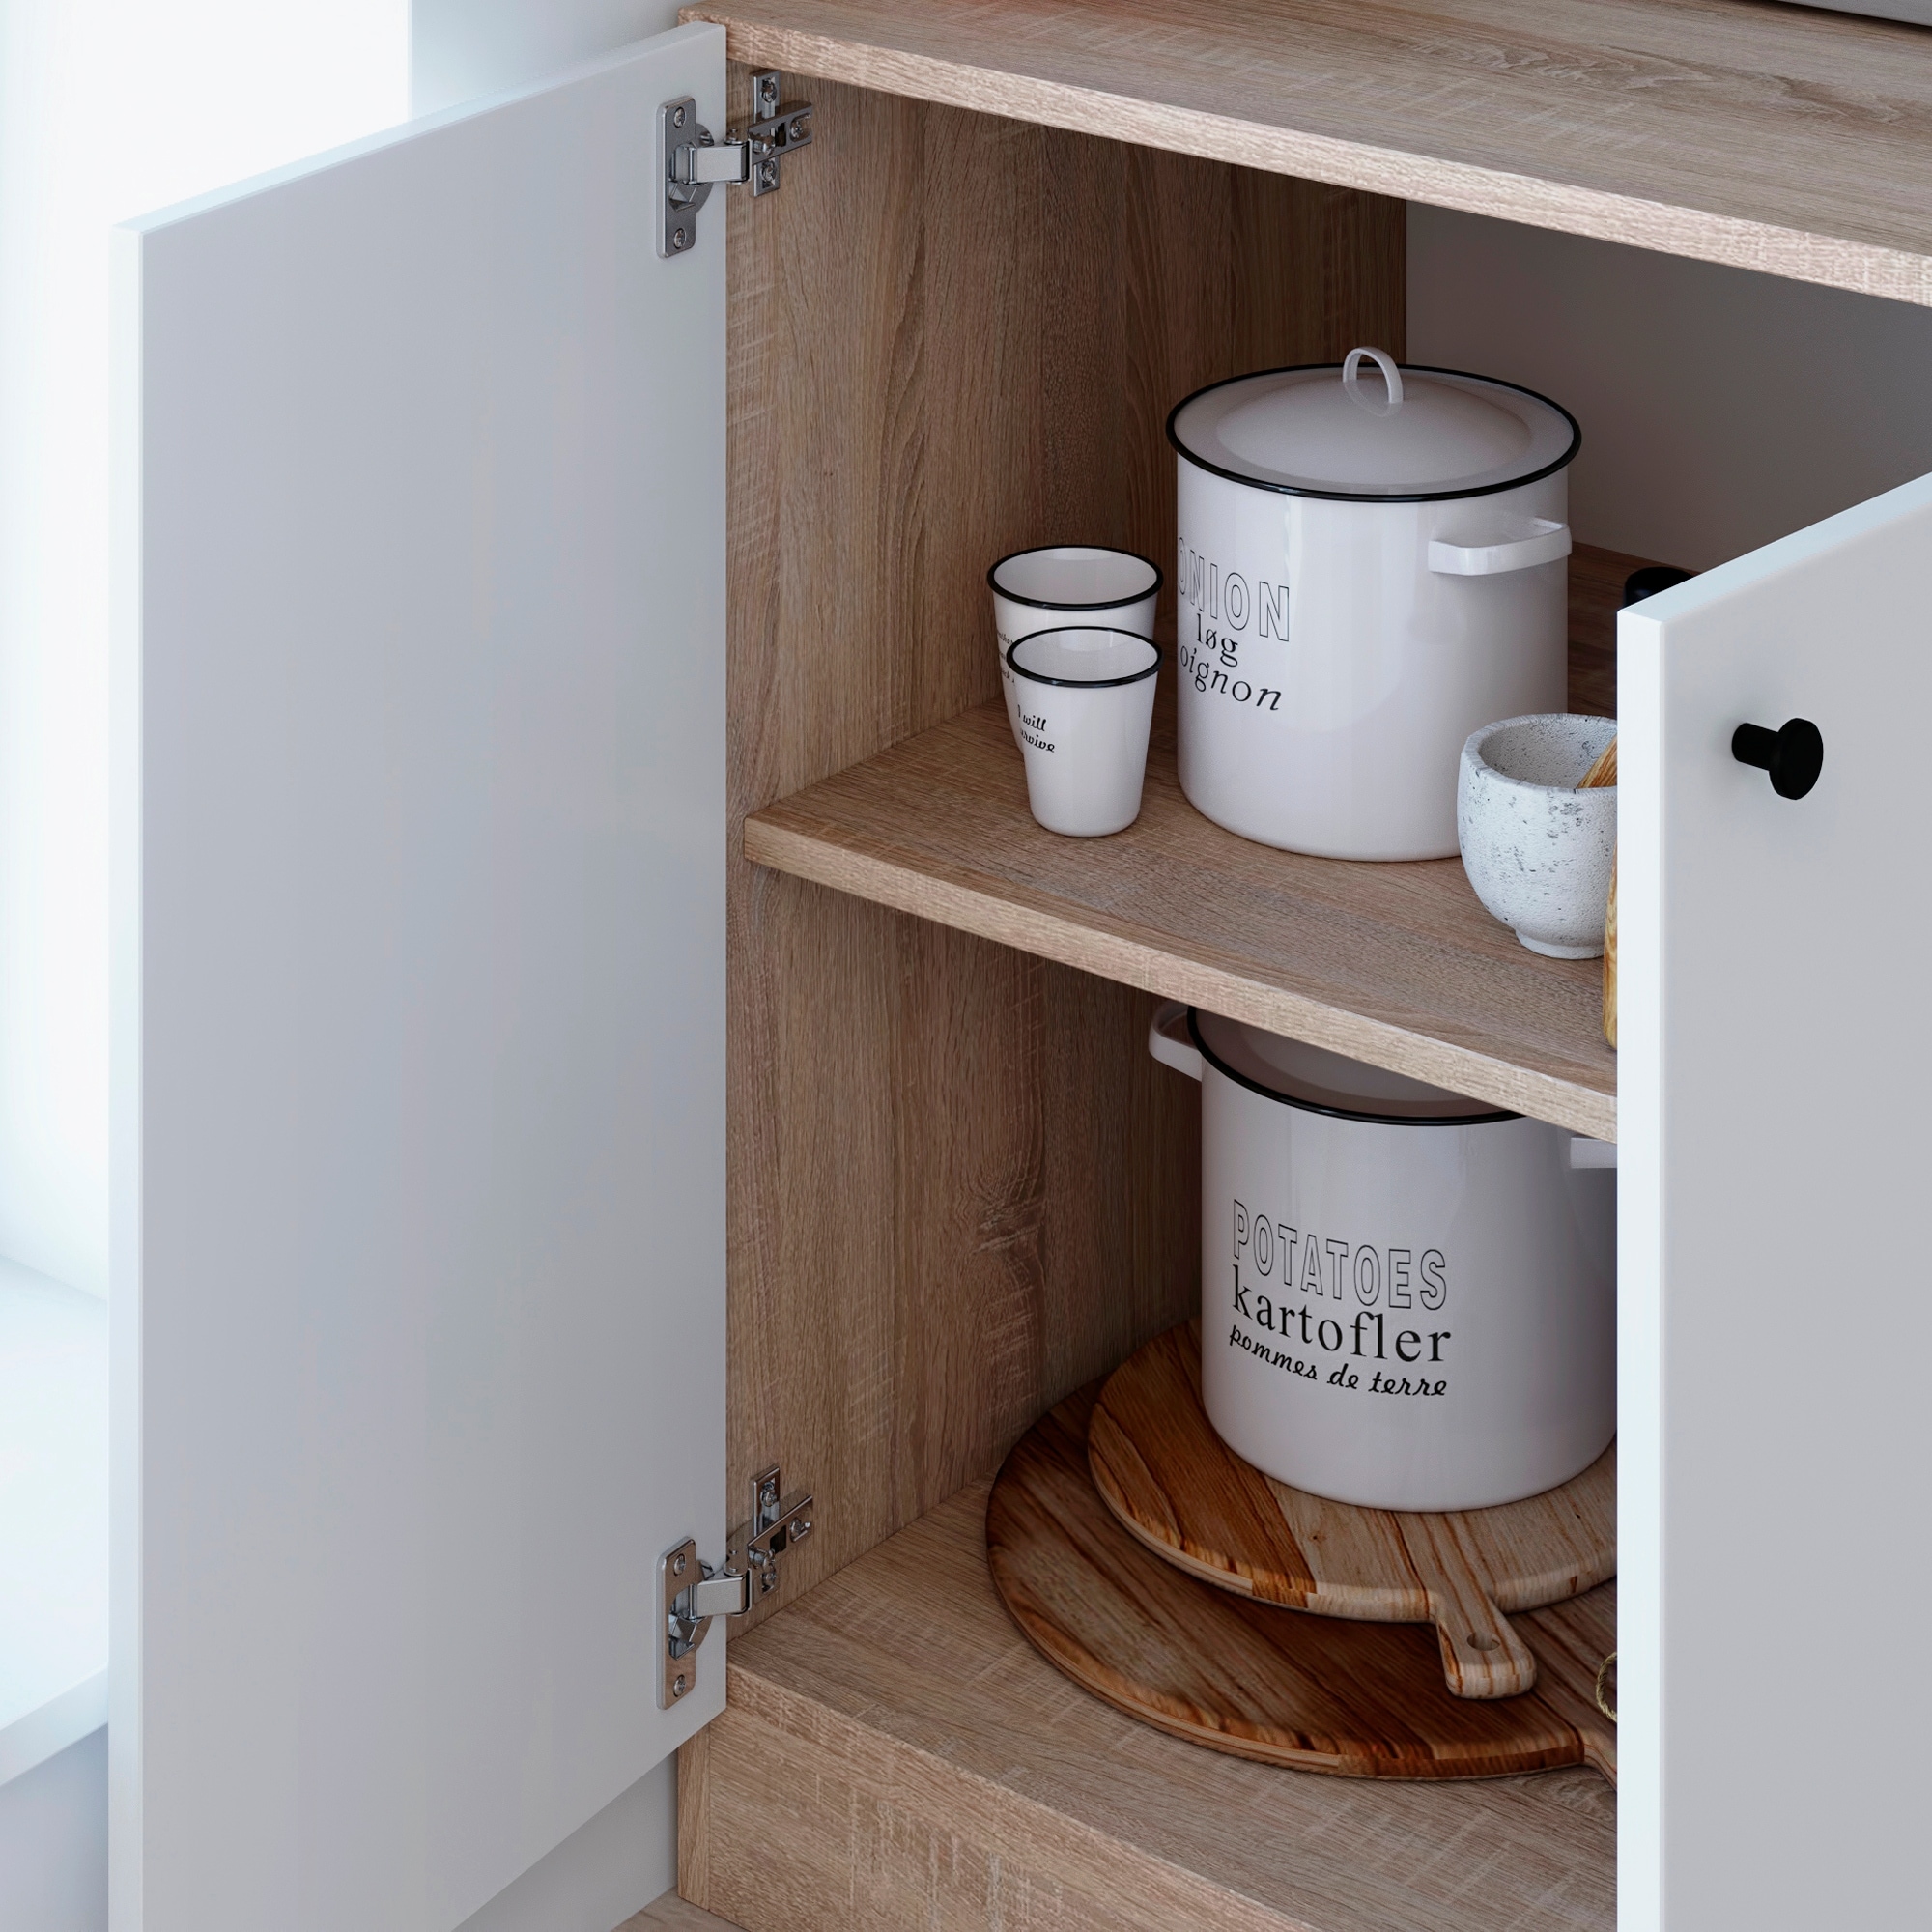 https://ak1.ostkcdn.com/images/products/is/images/direct/3ab5e658e568b6fef8ec1a8b7f4a386af5e2264c/Living-Skog-Scandi-Pantry-Kitchen-Storage-Cabinet-White-Large-For-Microwave.jpg